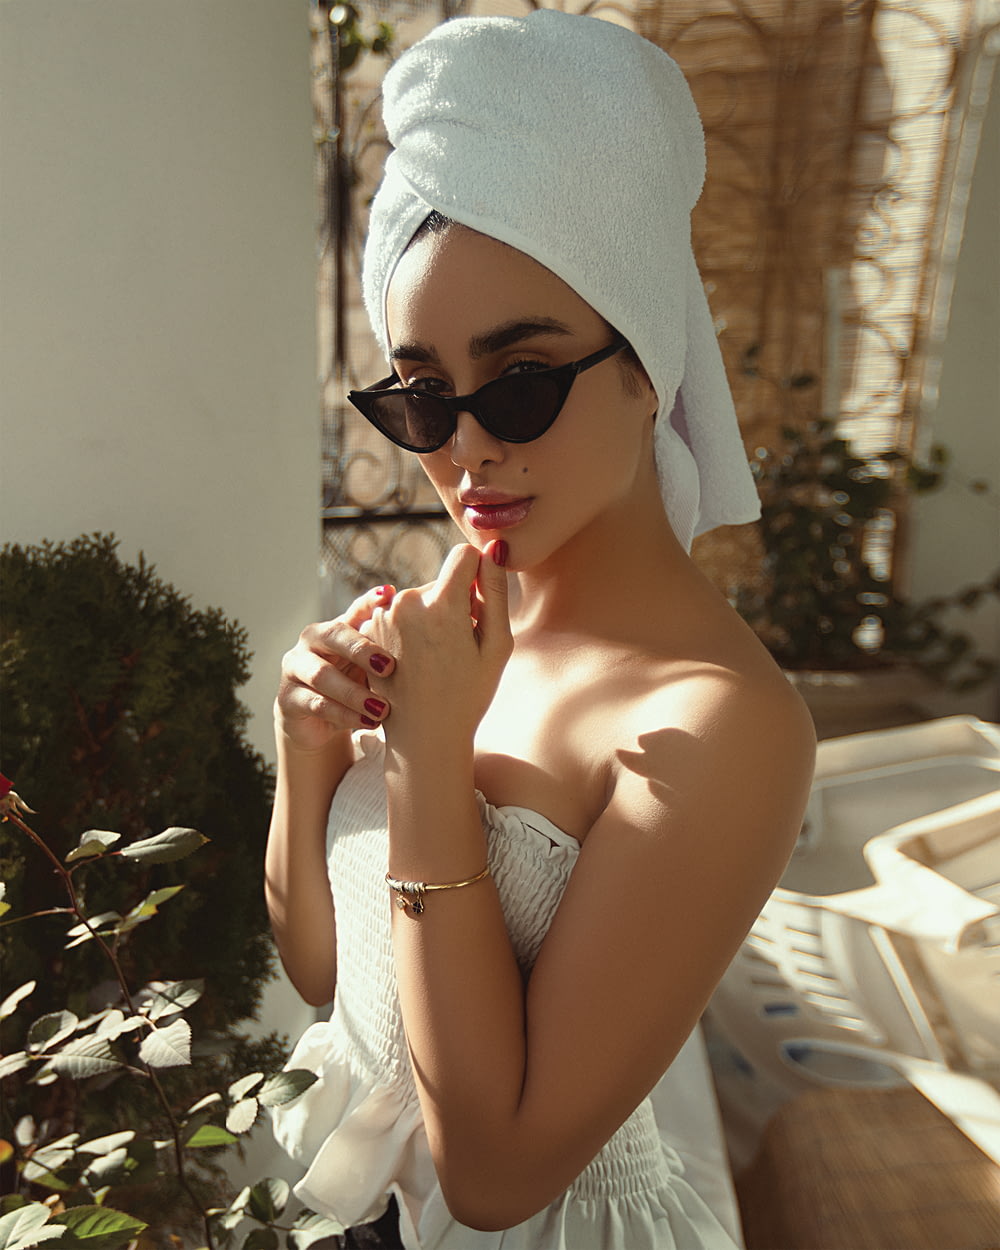 woman in white knit cap and black sunglasses